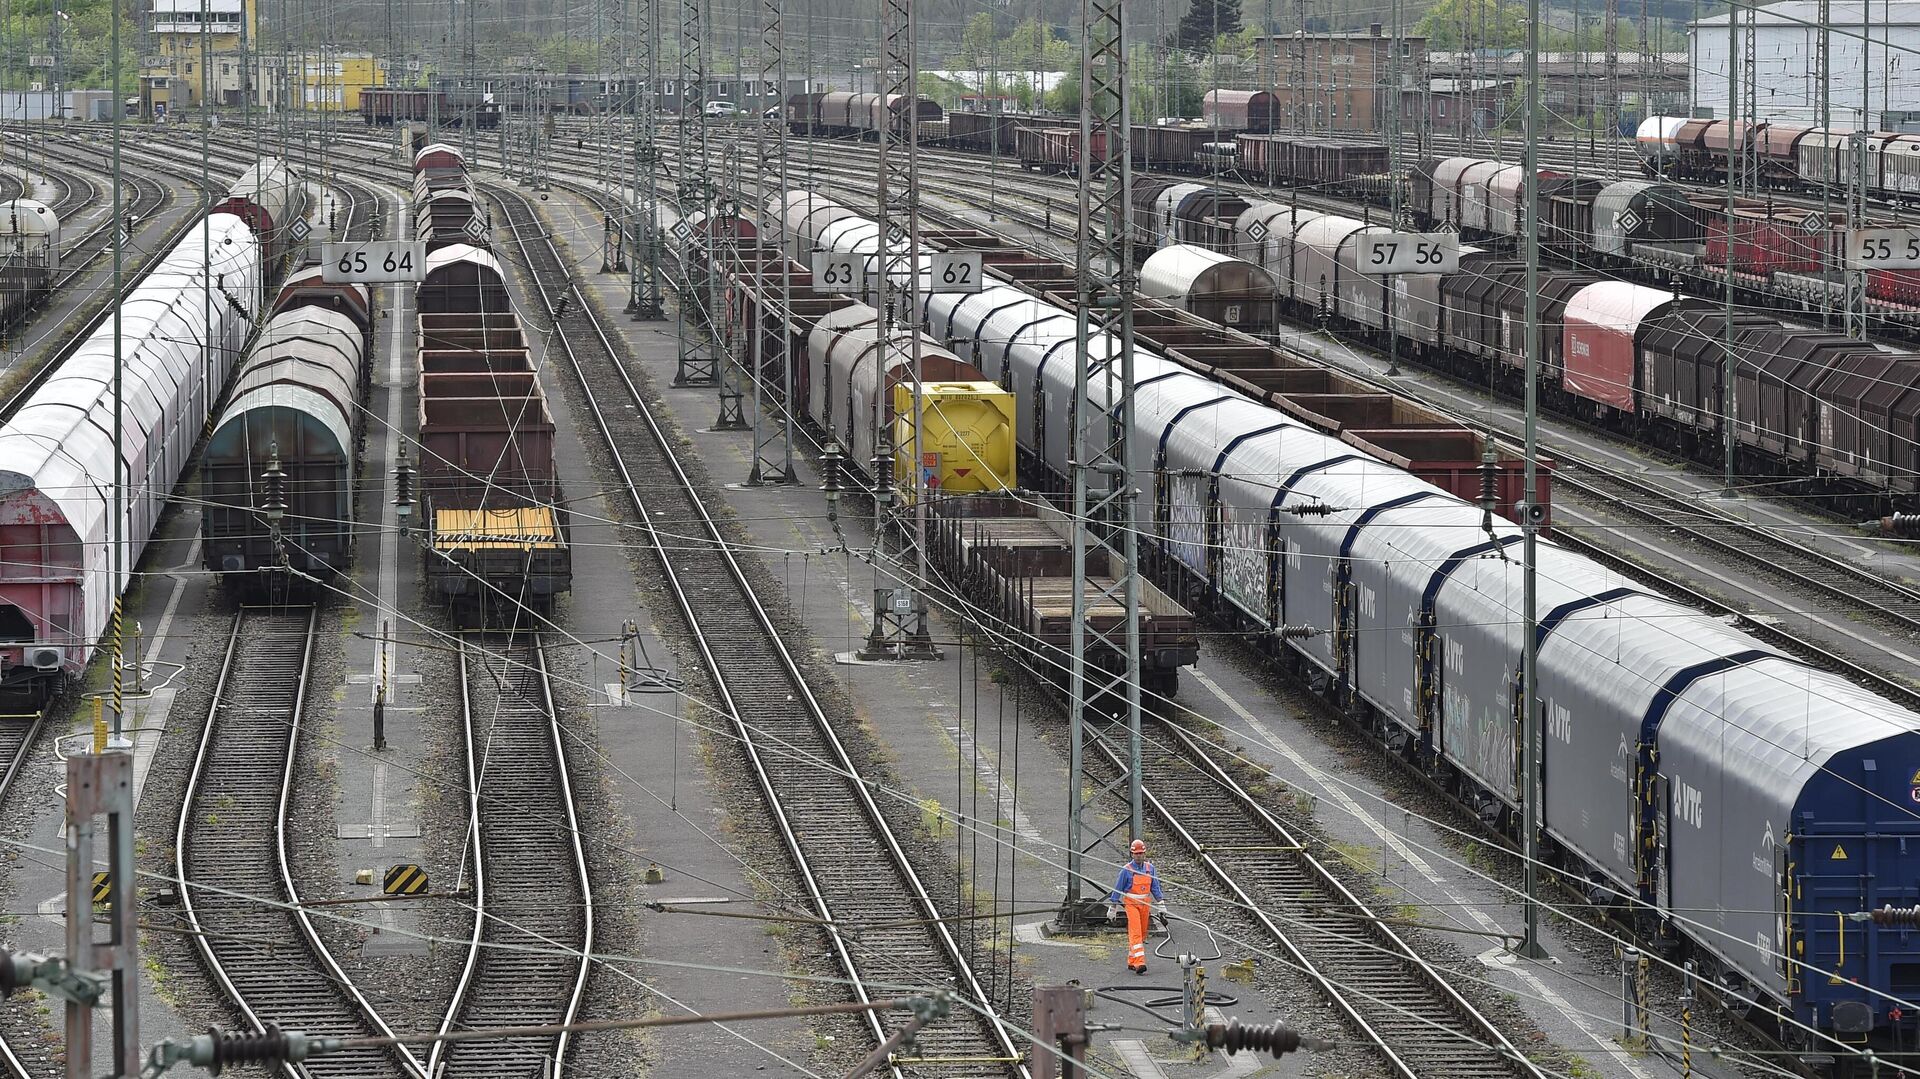 Freight trains stand still at a train station in Hagen, western Germany, at the start of Germany's longest rail strike on Monday, May 4, 2015. - Sputnik International, 1920, 27.03.2023